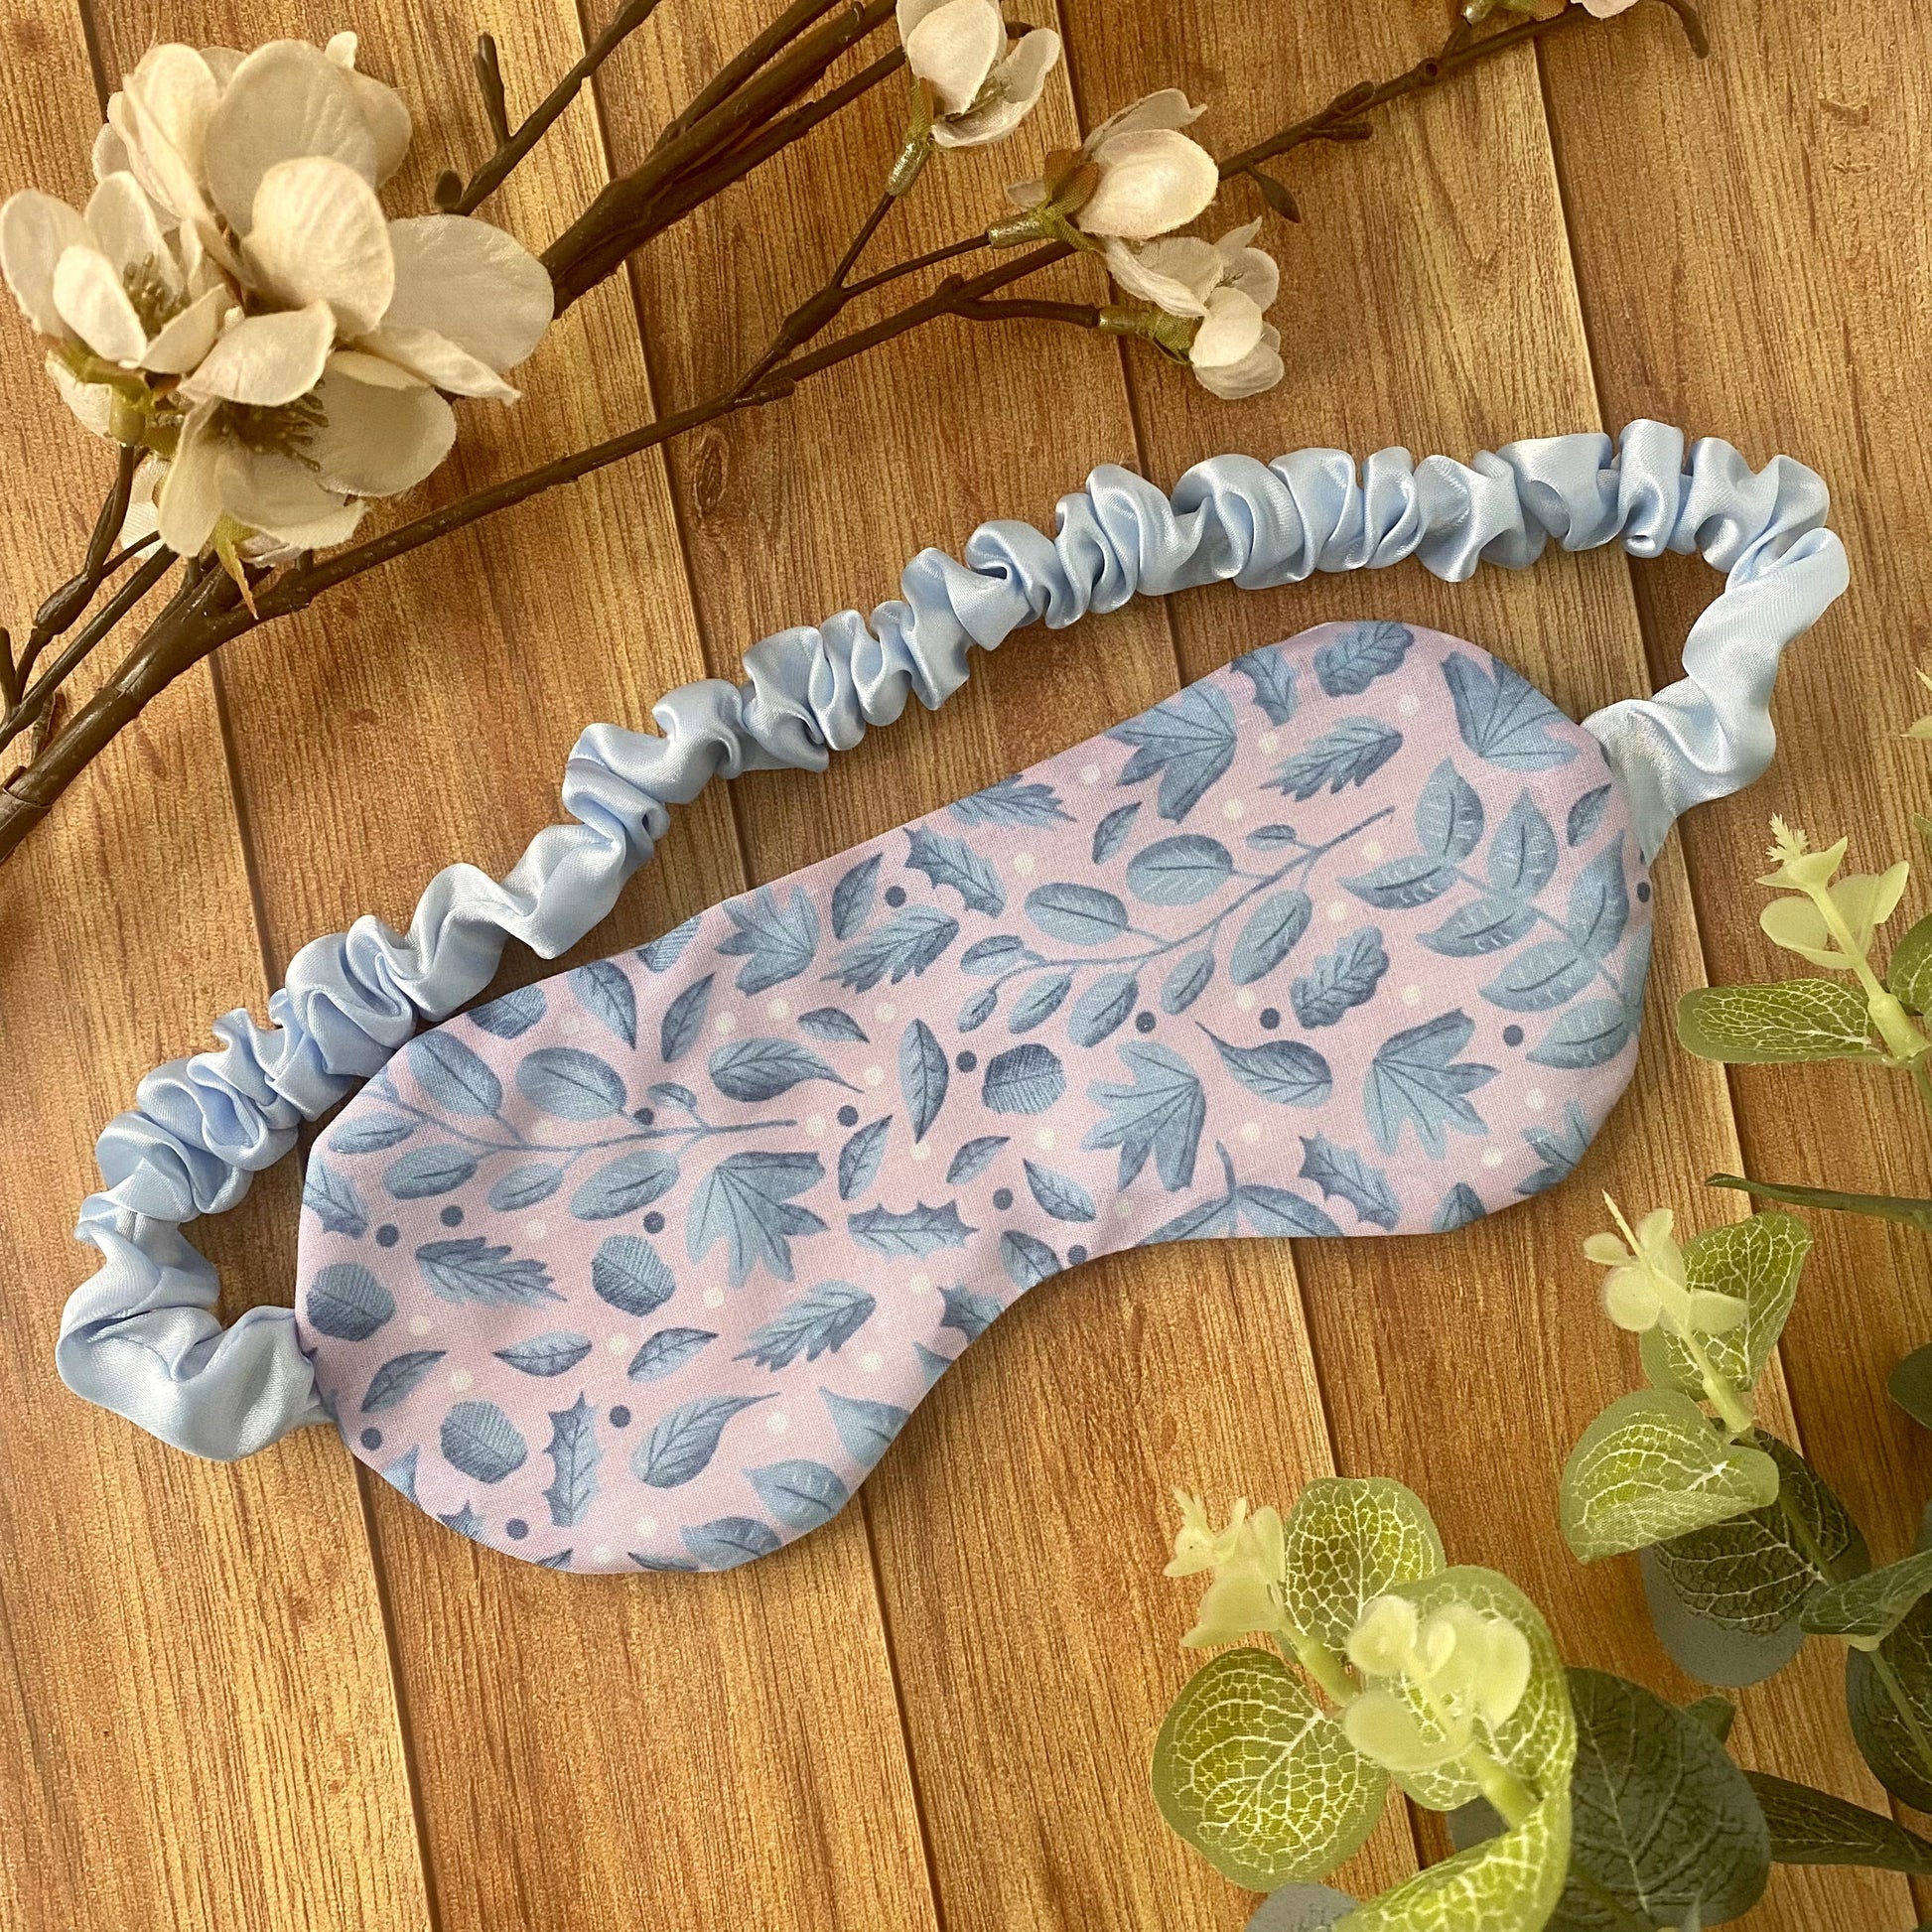 blue foliage on pink fabric made into a sleepmask, wooden background behind it